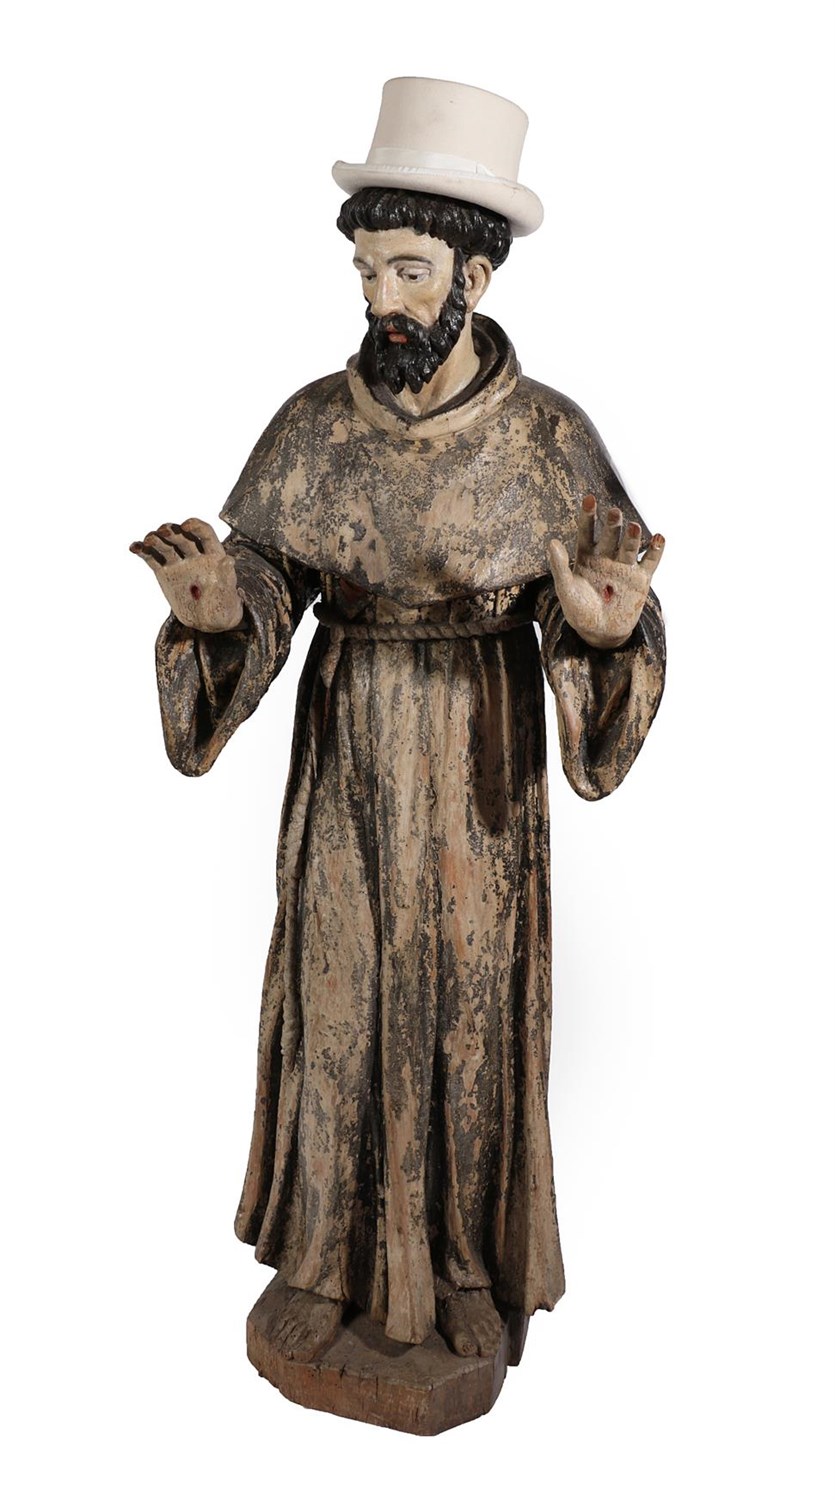 Lot 31 - An Italian Polychrome Wooden Figure of St Francis of Assisi, 18th century, displaying the stigmata